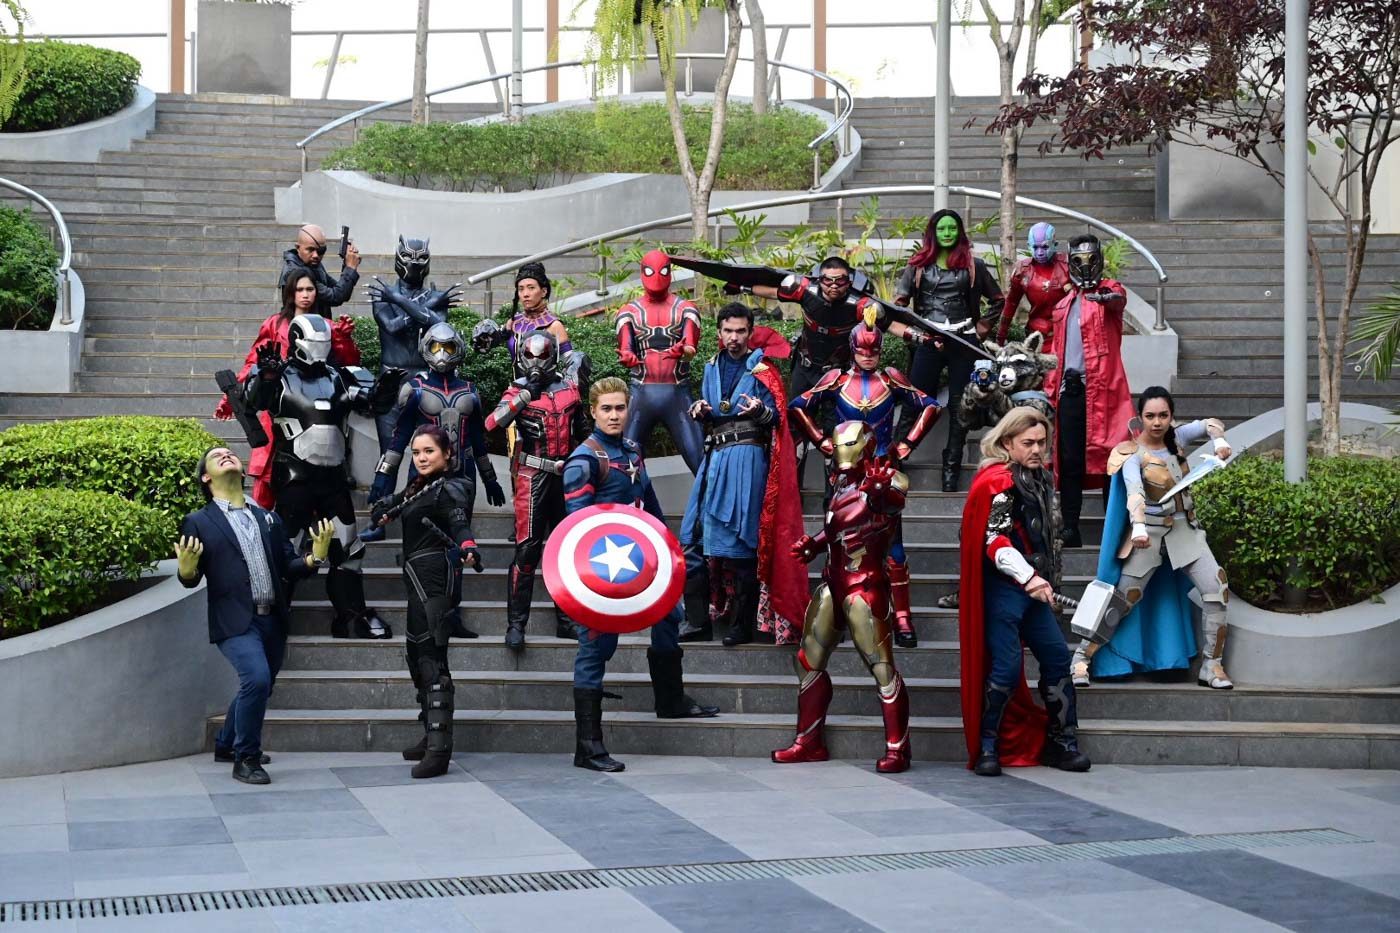 COSPLAY. Marvel Cinematic Universe Fans met the cosplayers of cast of the Avengers: Endgame during the film’s opening day at Ayala Circuit Makati, April 24, 2019.
Both kids and adults came in wearing their novelty Marvel shirts eager to watch the film early. Photo by Alecs Ongcal/Rappler 